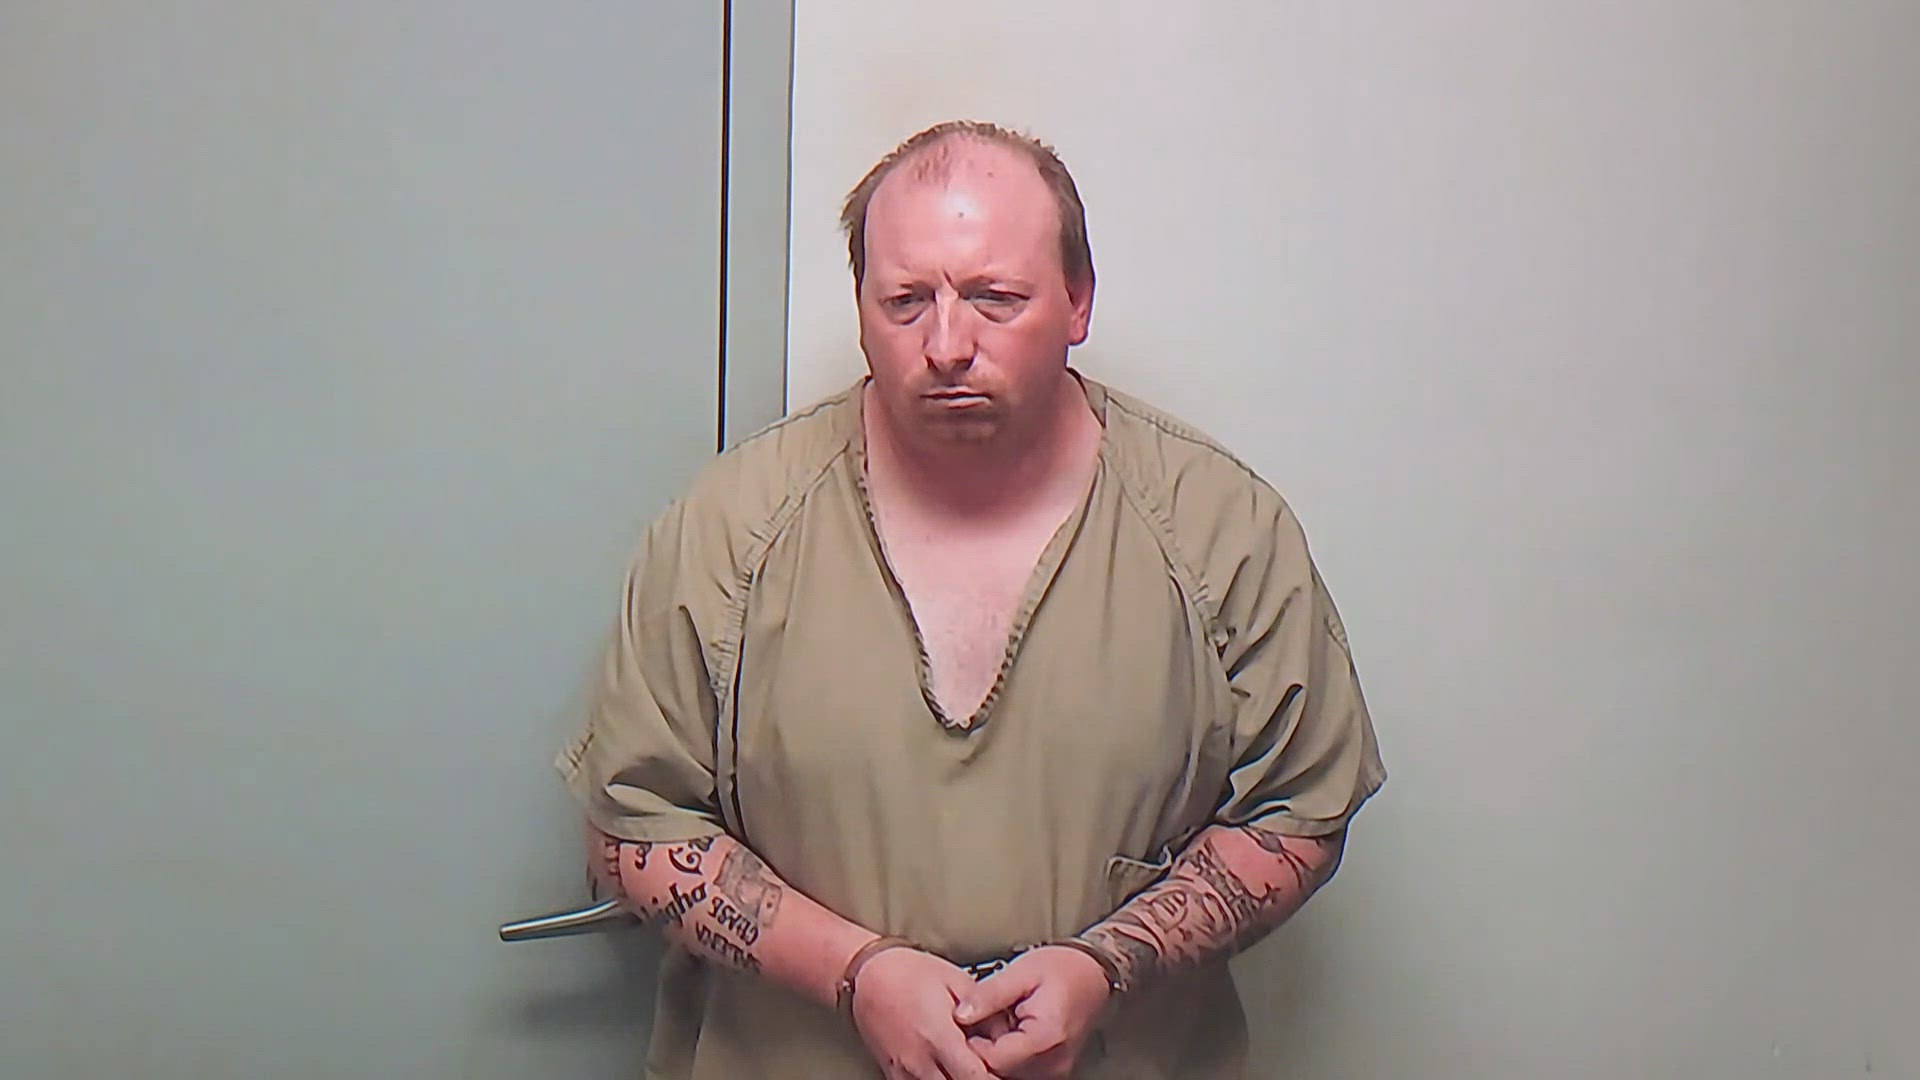 Randy Mollett, 35, is charged with child endangerment, reckless homicide and murder in connection to the boy's death.